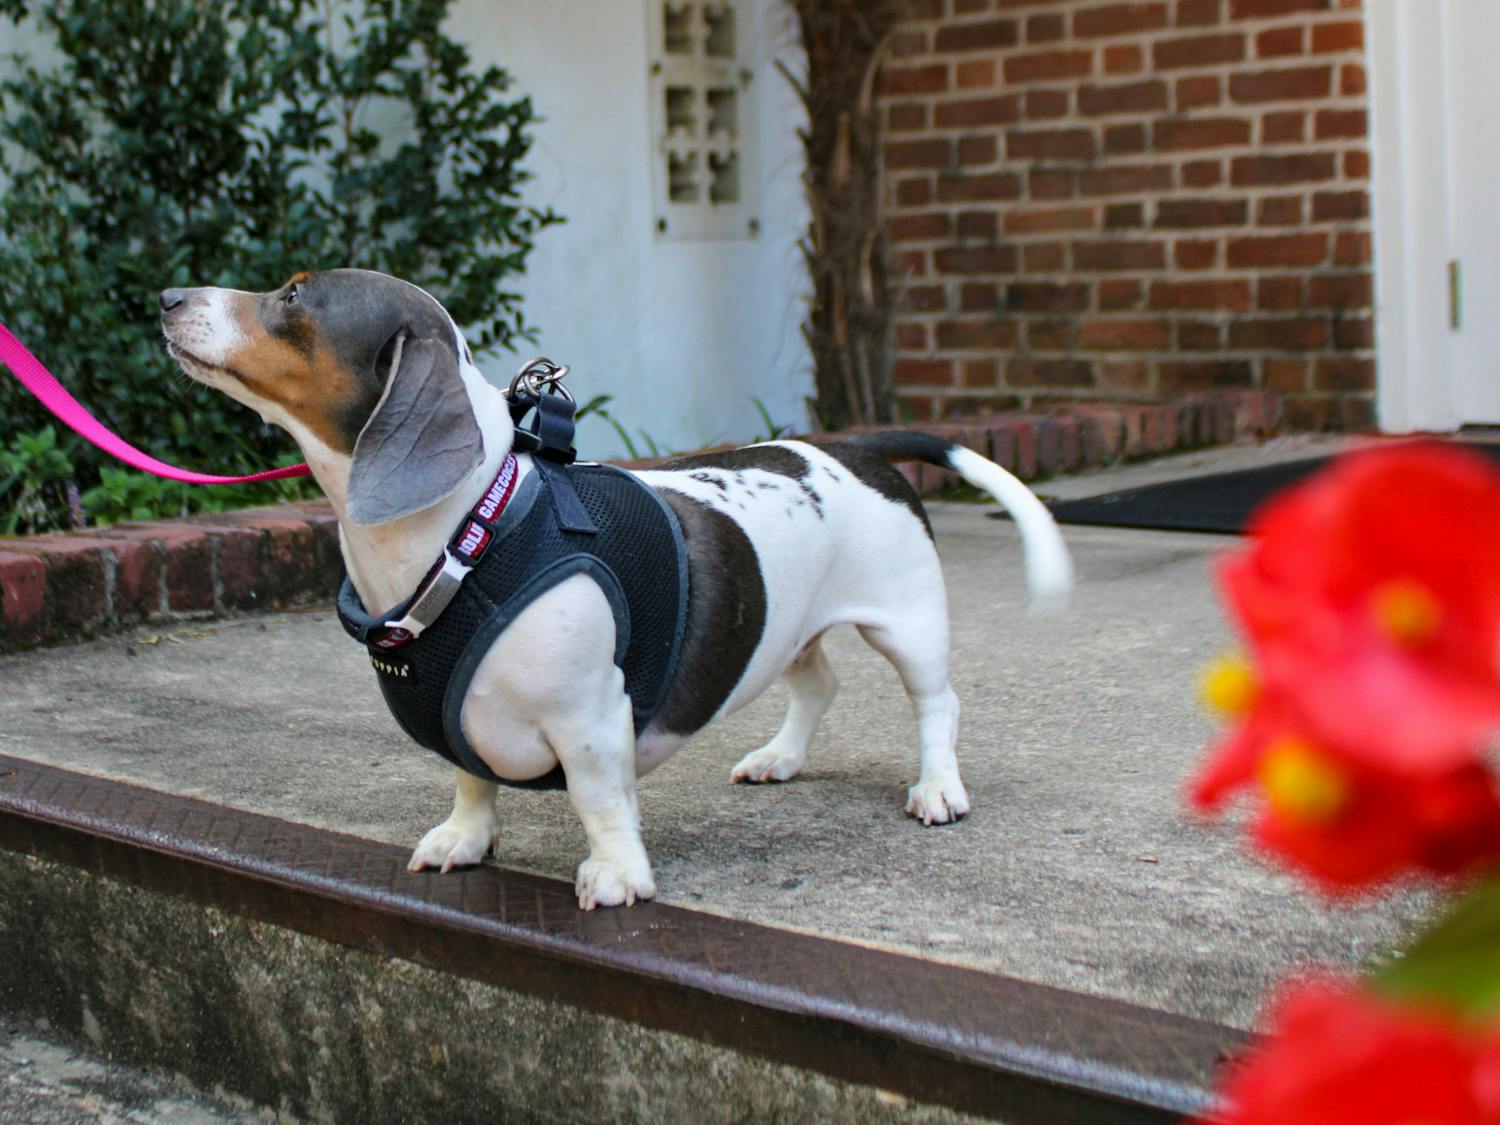 A multicolored dachshund stands on a step in Columbia, S.C. during a community dachshund walk held by Dachshunds of Columbia on Sept. 17, 2022. The Columbia dog-walking group gathered with their furry friends for a walk through USC's Horseshoe on Saturday morning.